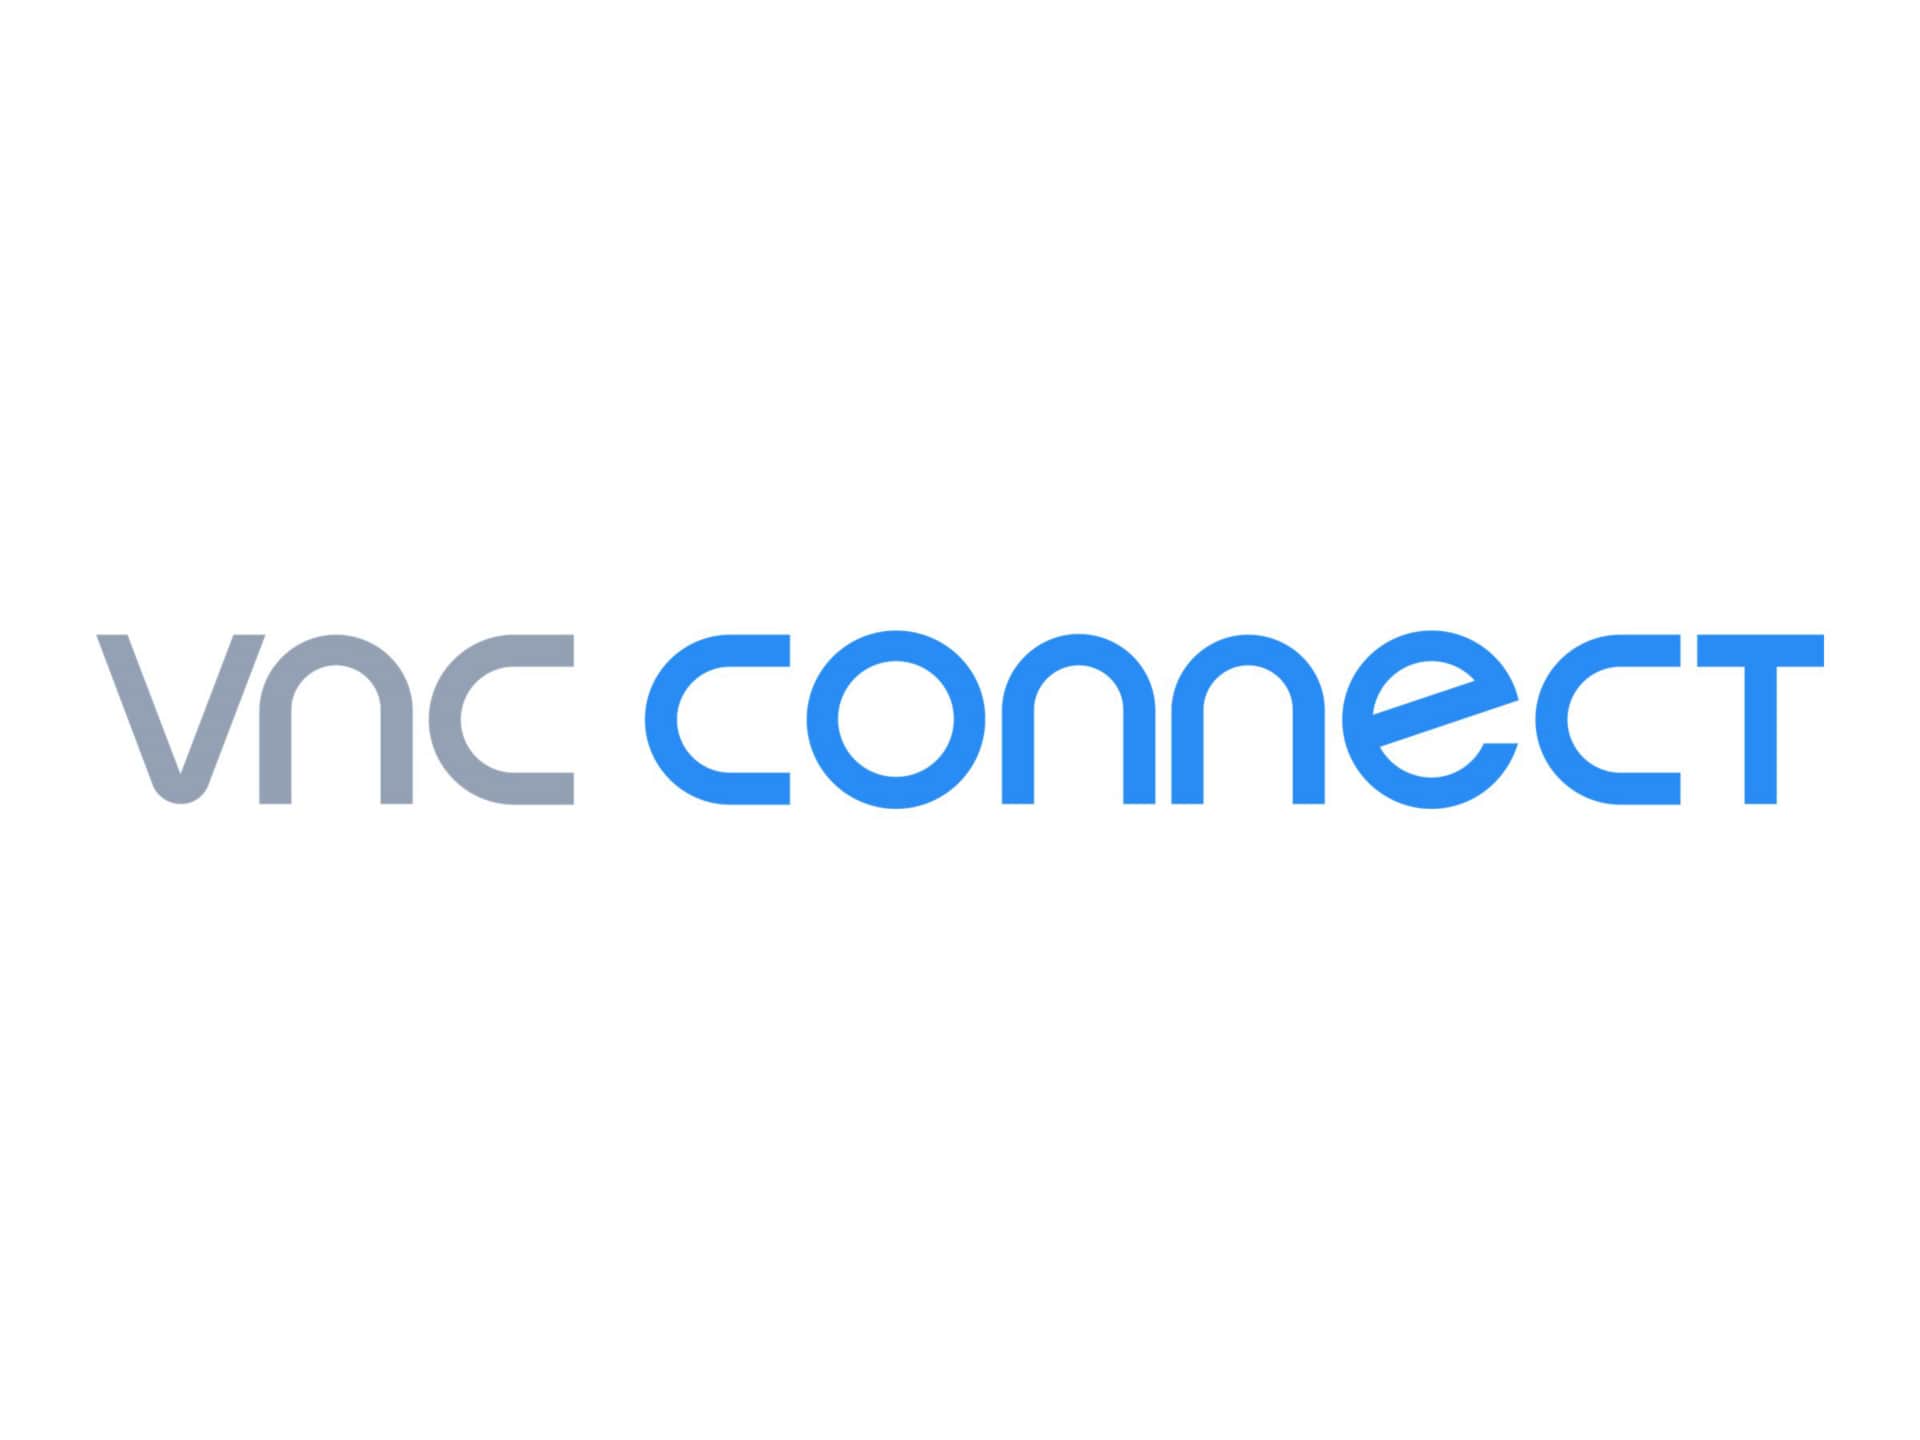 VNC Connect Professional - subscription license (1 year) - unlimited users, 1 computer